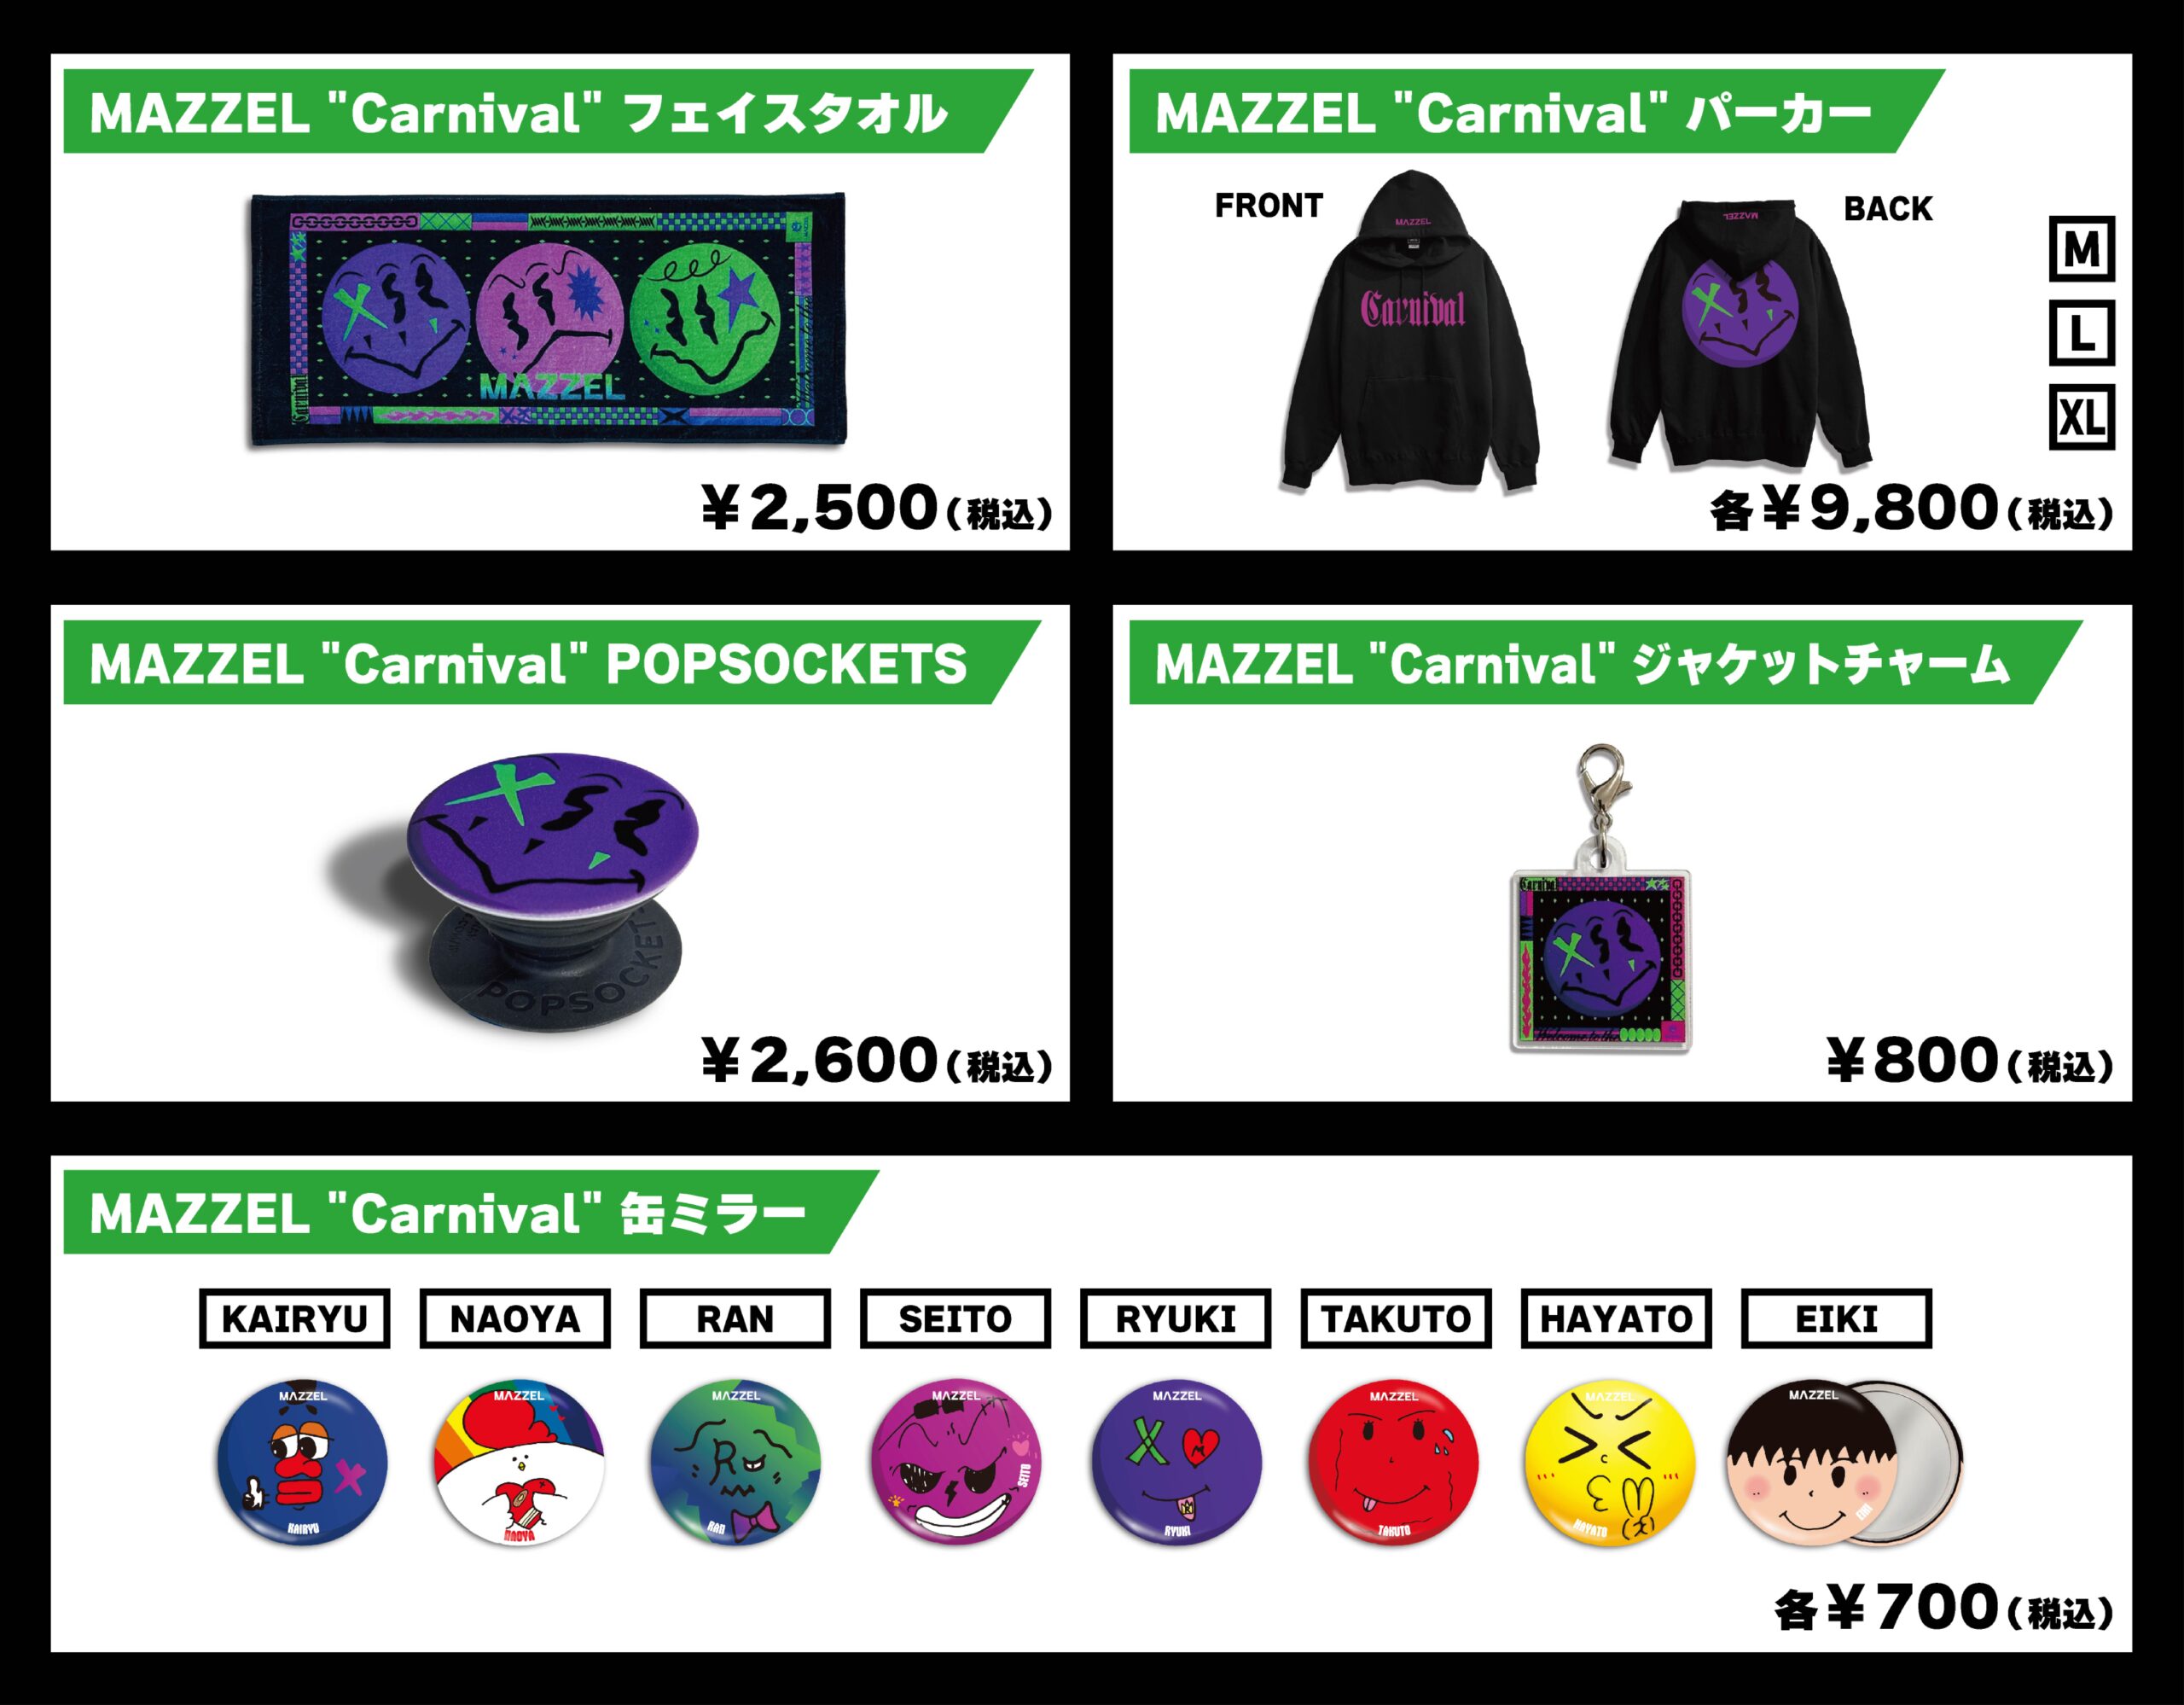 MAZZEL SHOWCASE “Carnival”』OFFICIAL GOODS 数量限定販売のお知らせ 